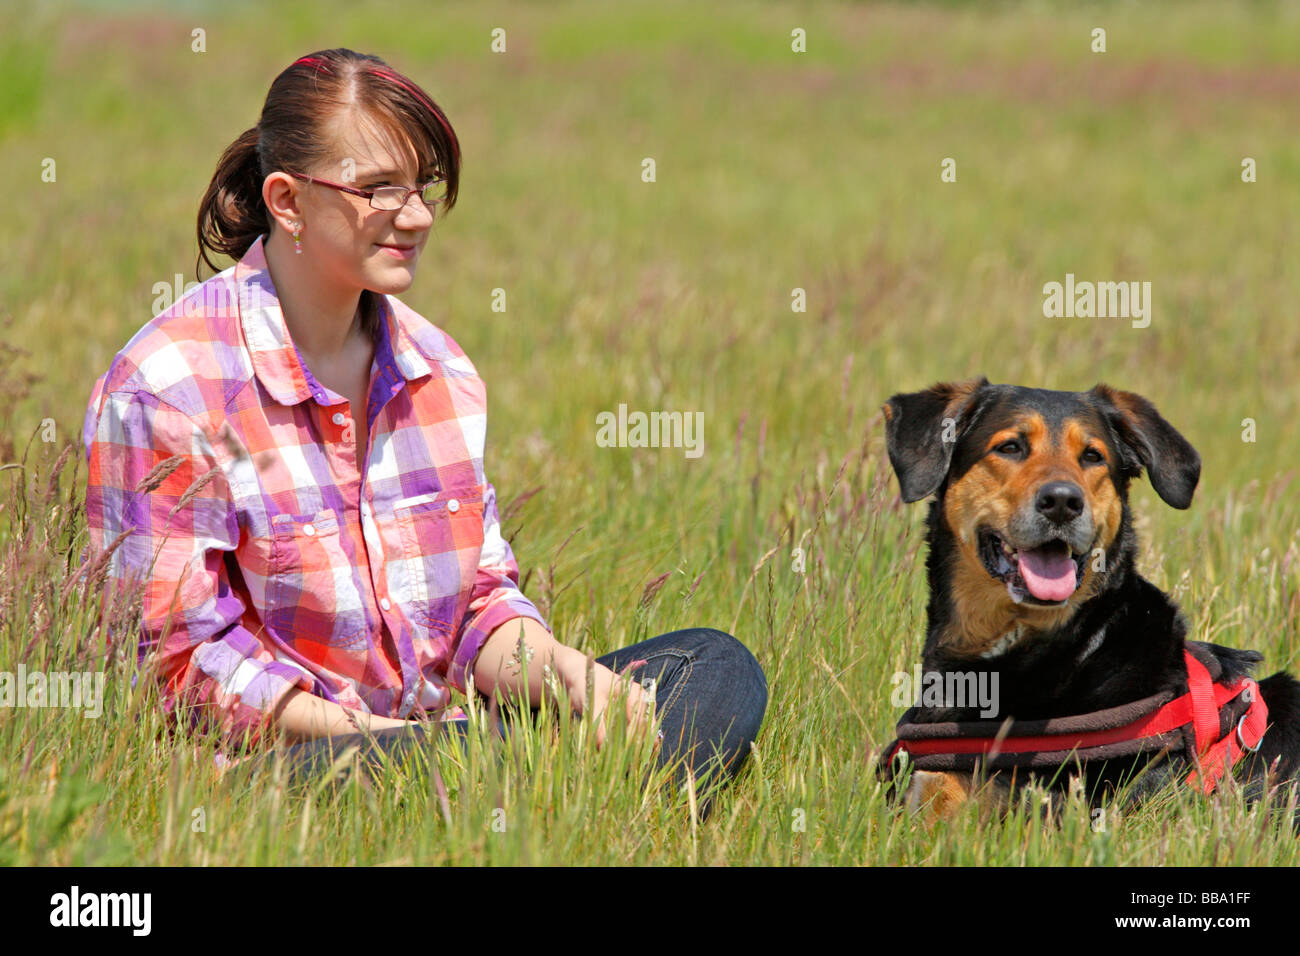 a young girl and her big dog Stock Photo